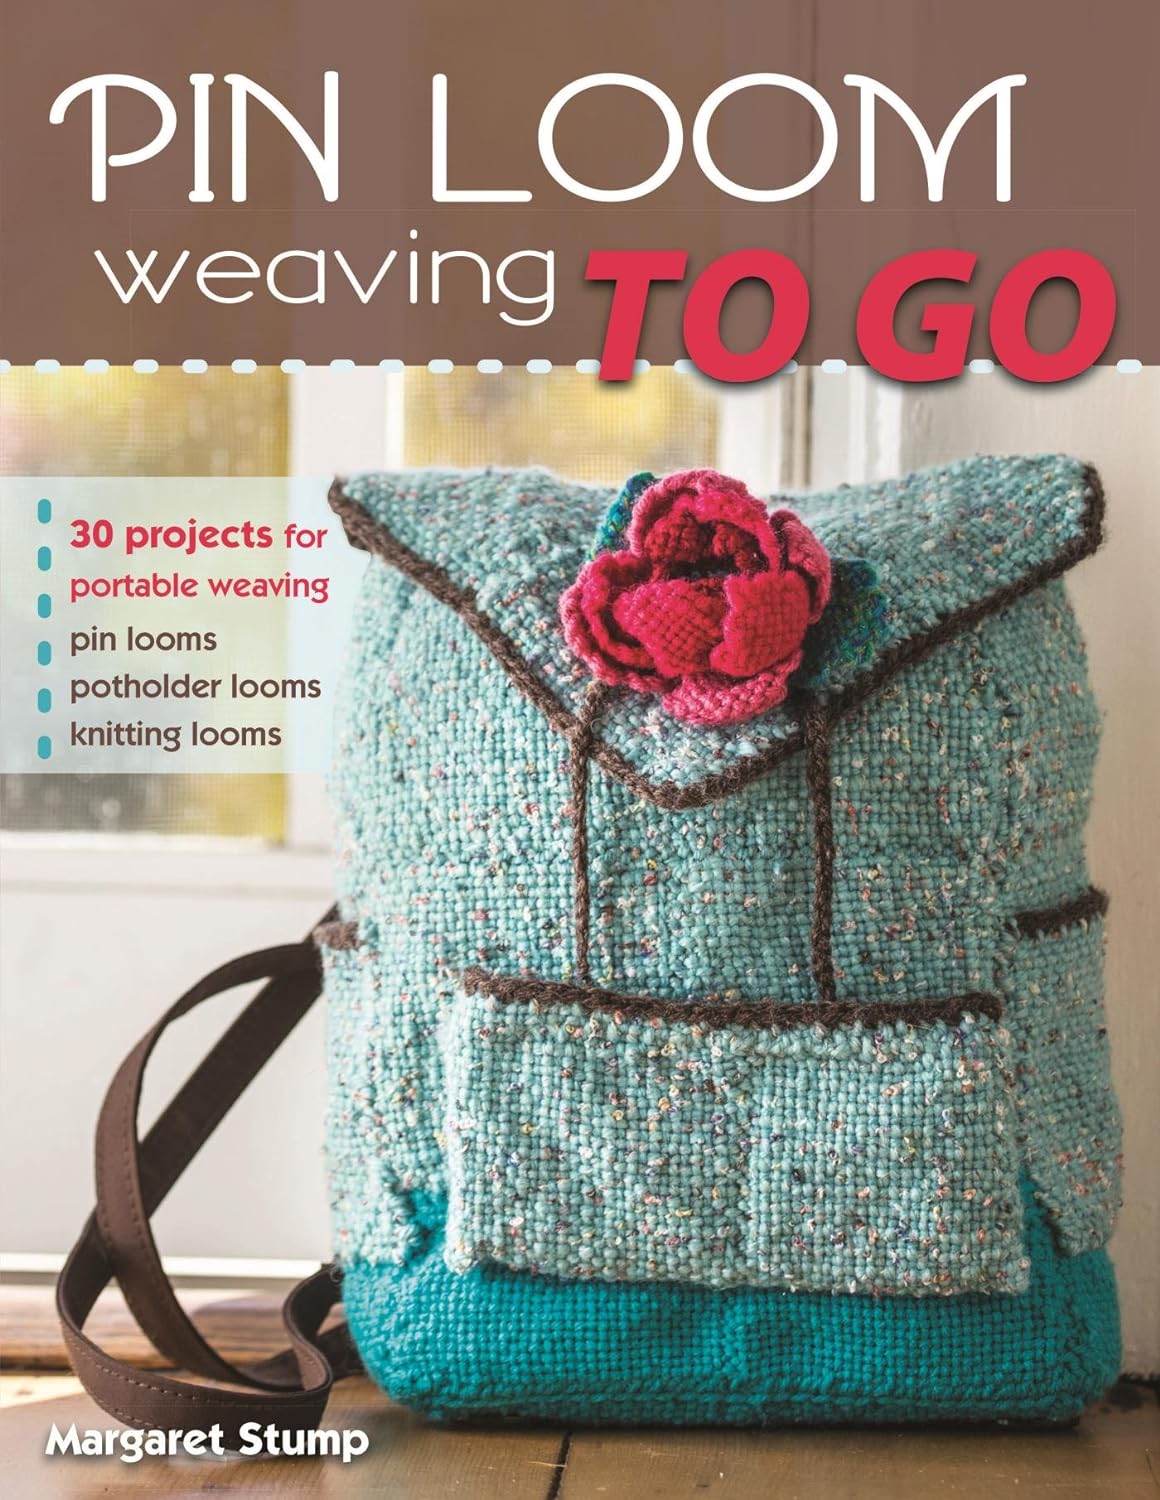 Pin Loom Weaving to Go 30 Projects for Portable Weaving cover image